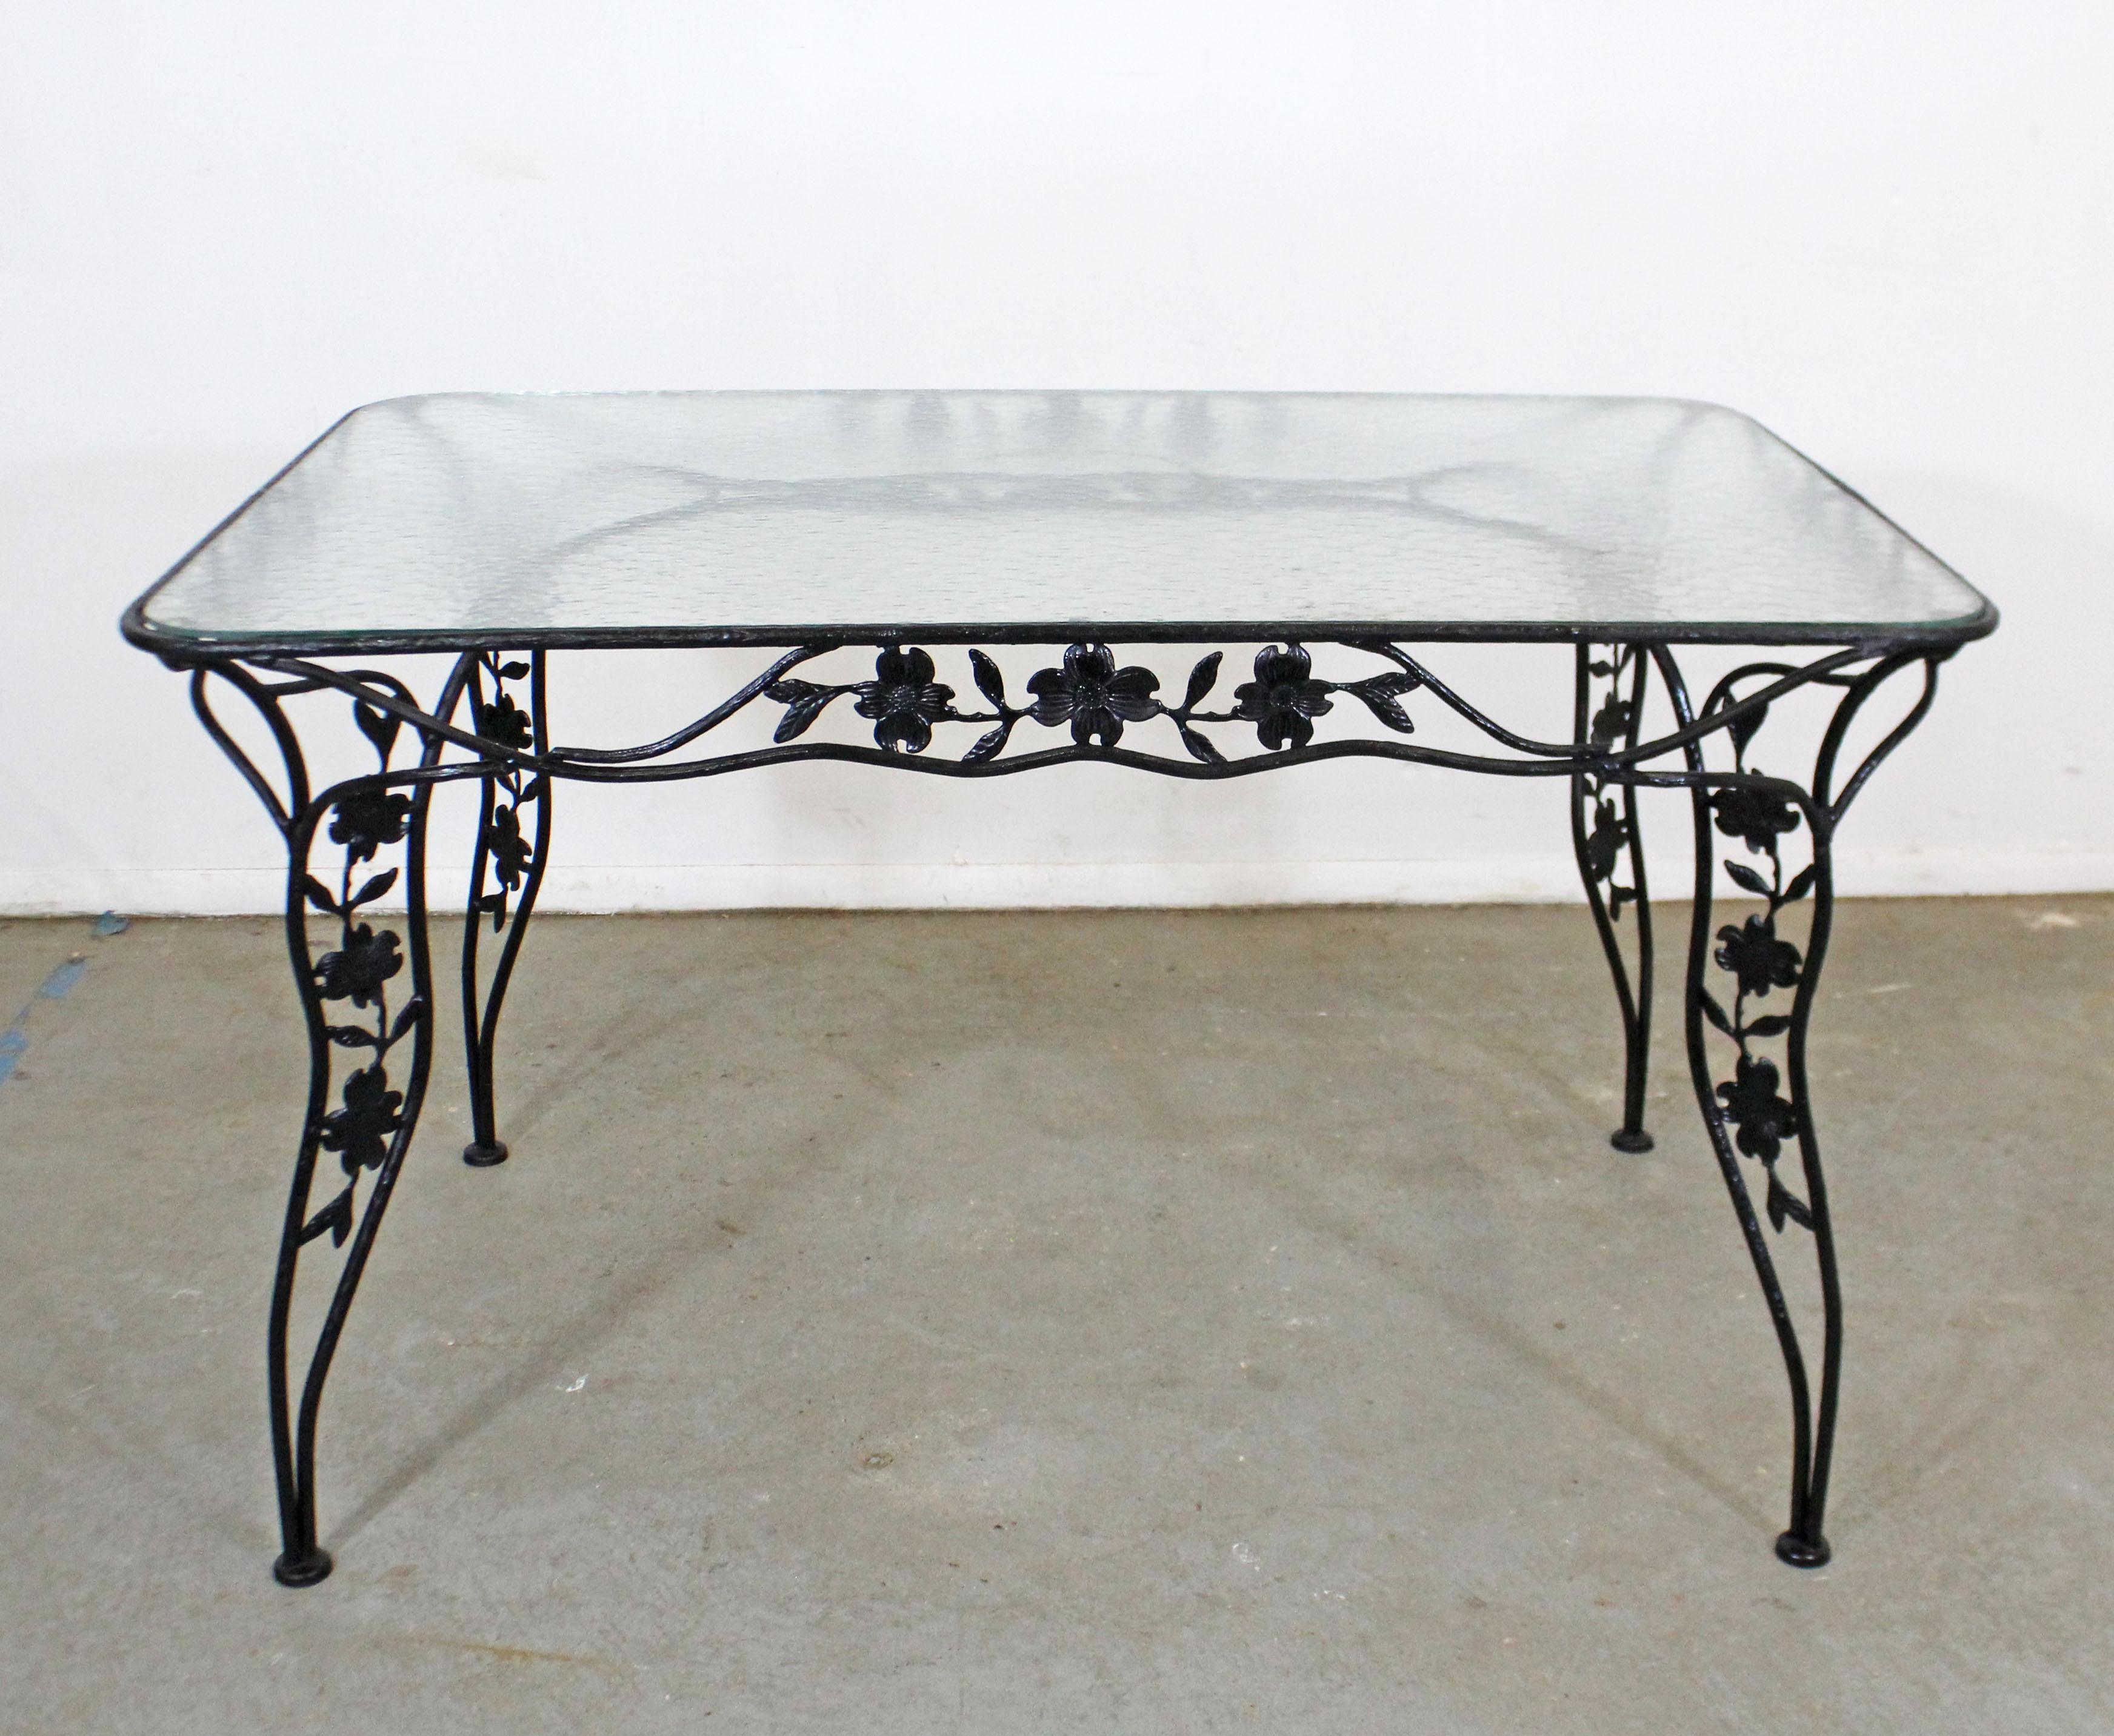 What a find. Offered is a vintage wrought iron dining table with a dogwood-leaf design and a removable glass top. Perfect for an outdoor patio space! Attributed to Meadowcraft's 'Dogwood' line. It is in good condition with a repainted and